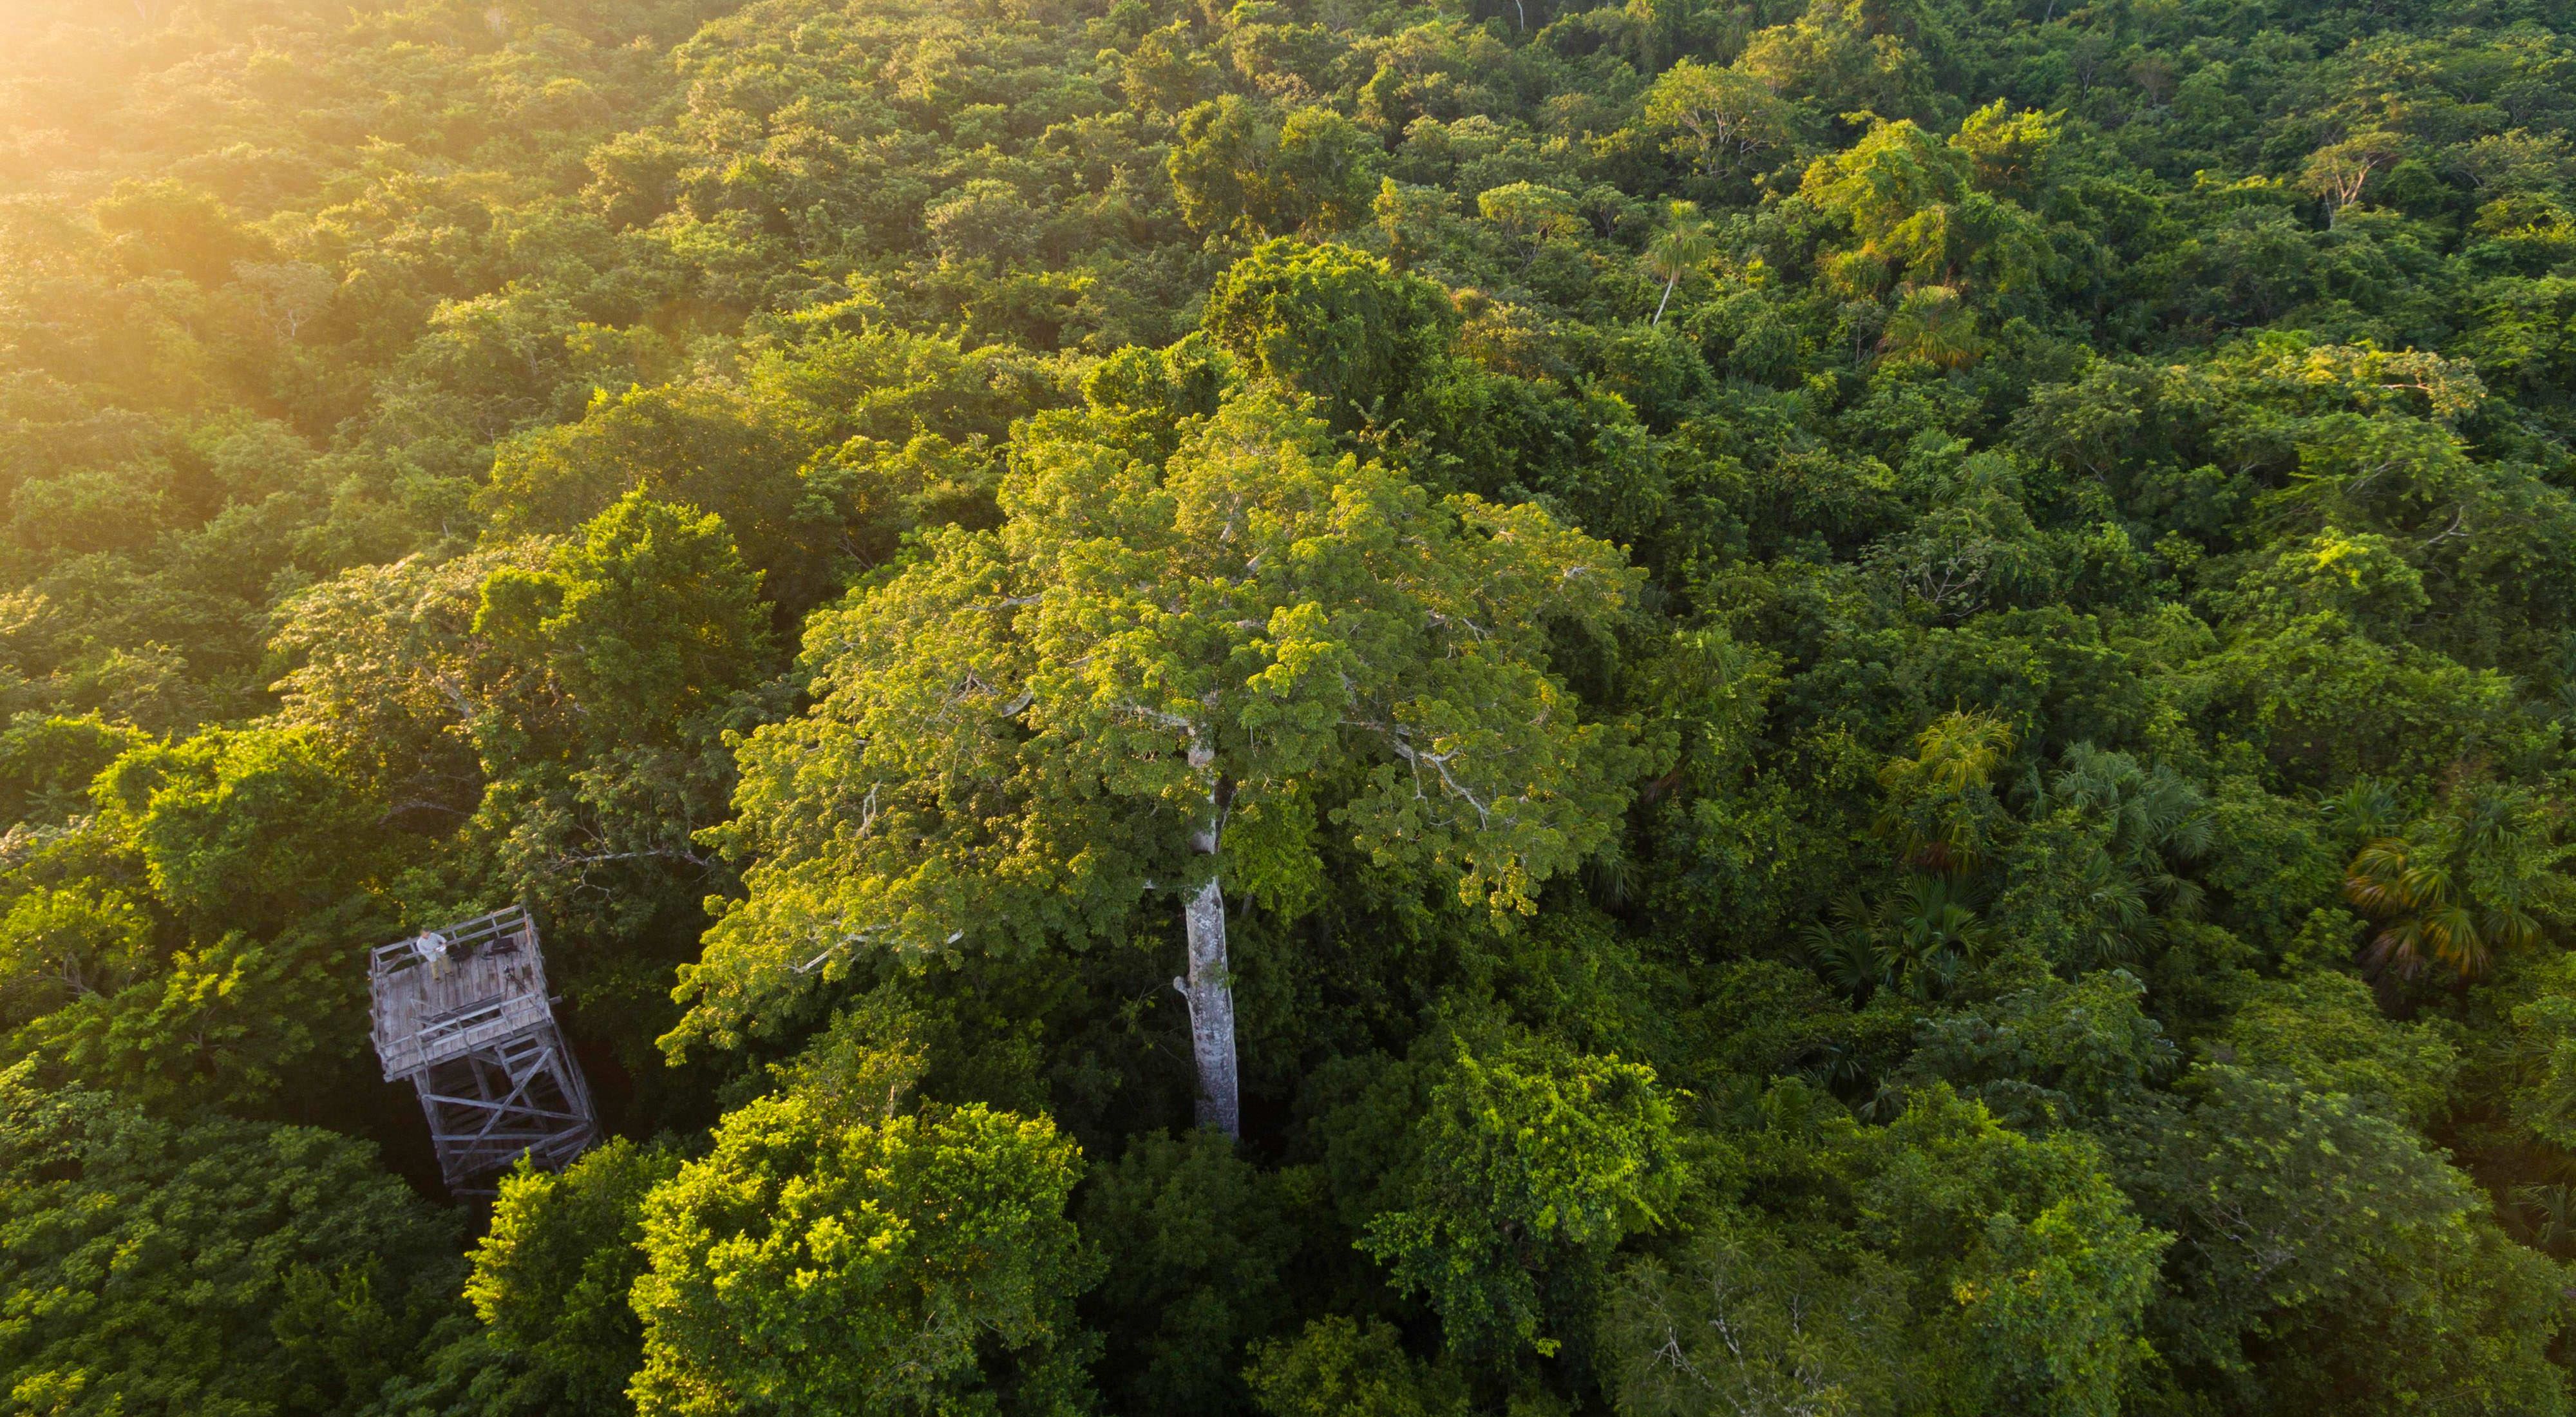 Aerial views of the hardwood forest around the logging community of Noh Bec, Quintana Roo.